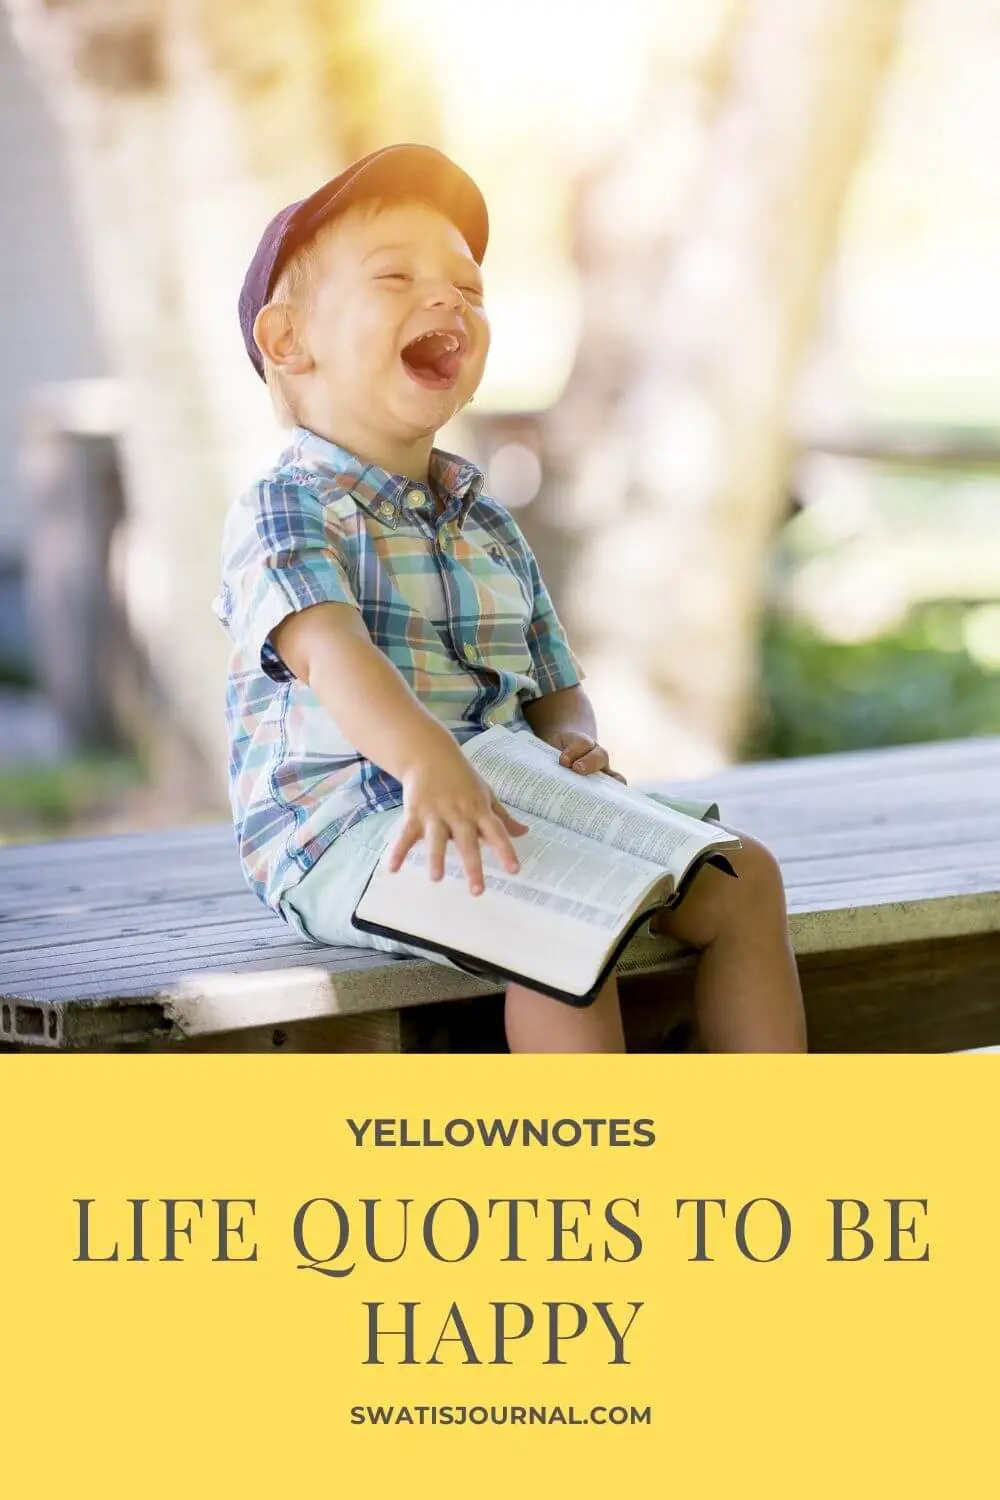 life quotes to be happy swatisjournal